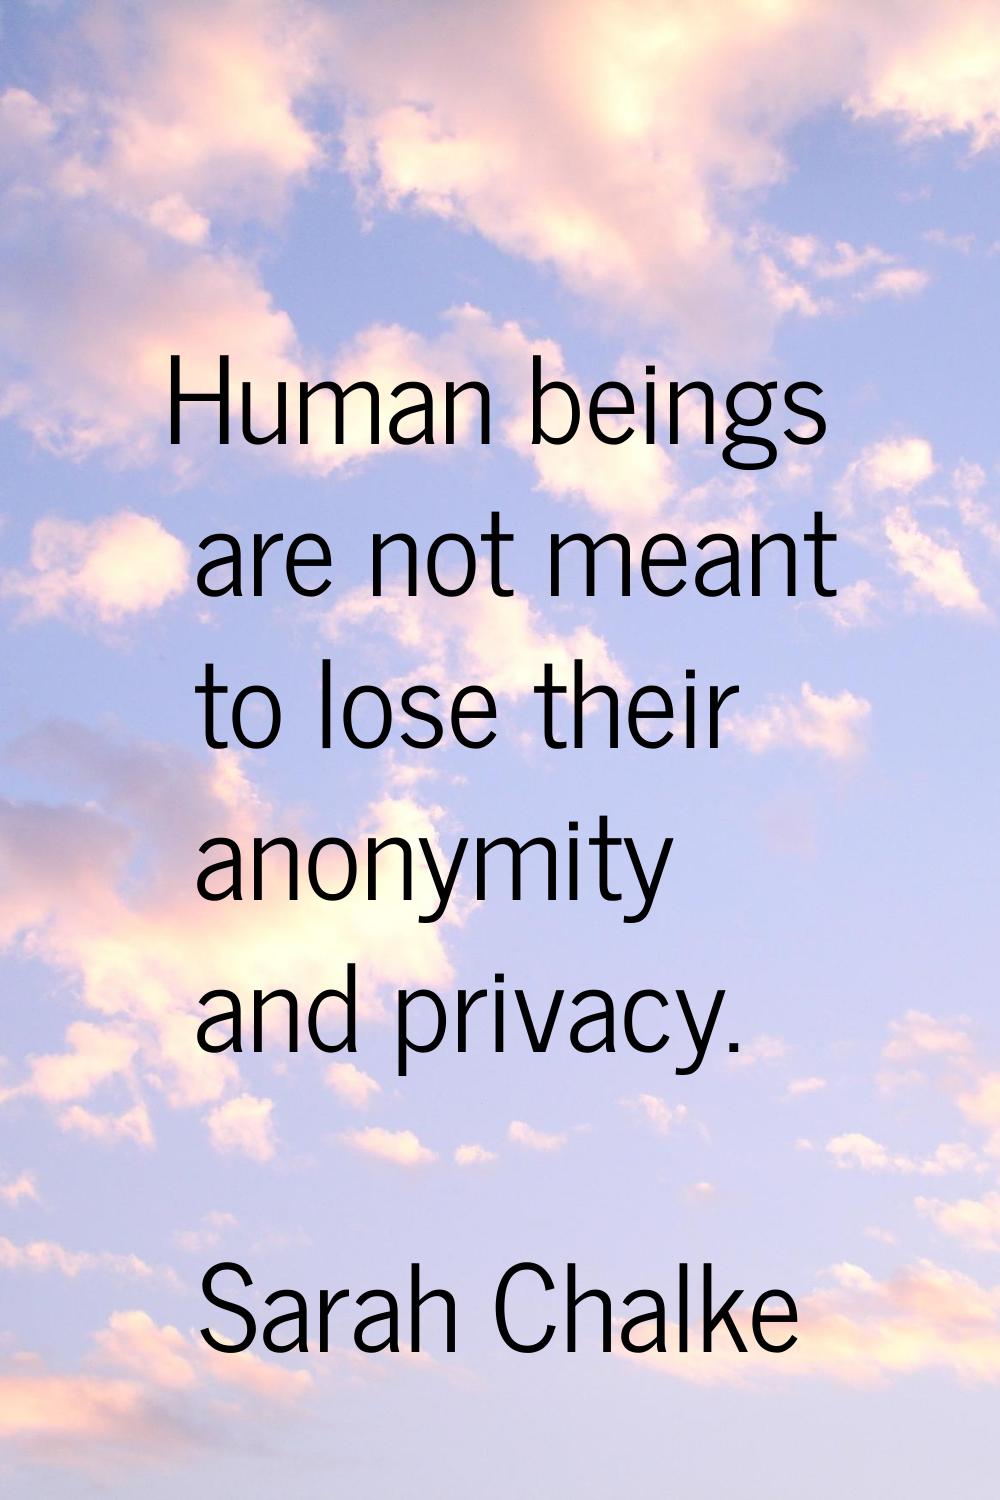 Human beings are not meant to lose their anonymity and privacy.